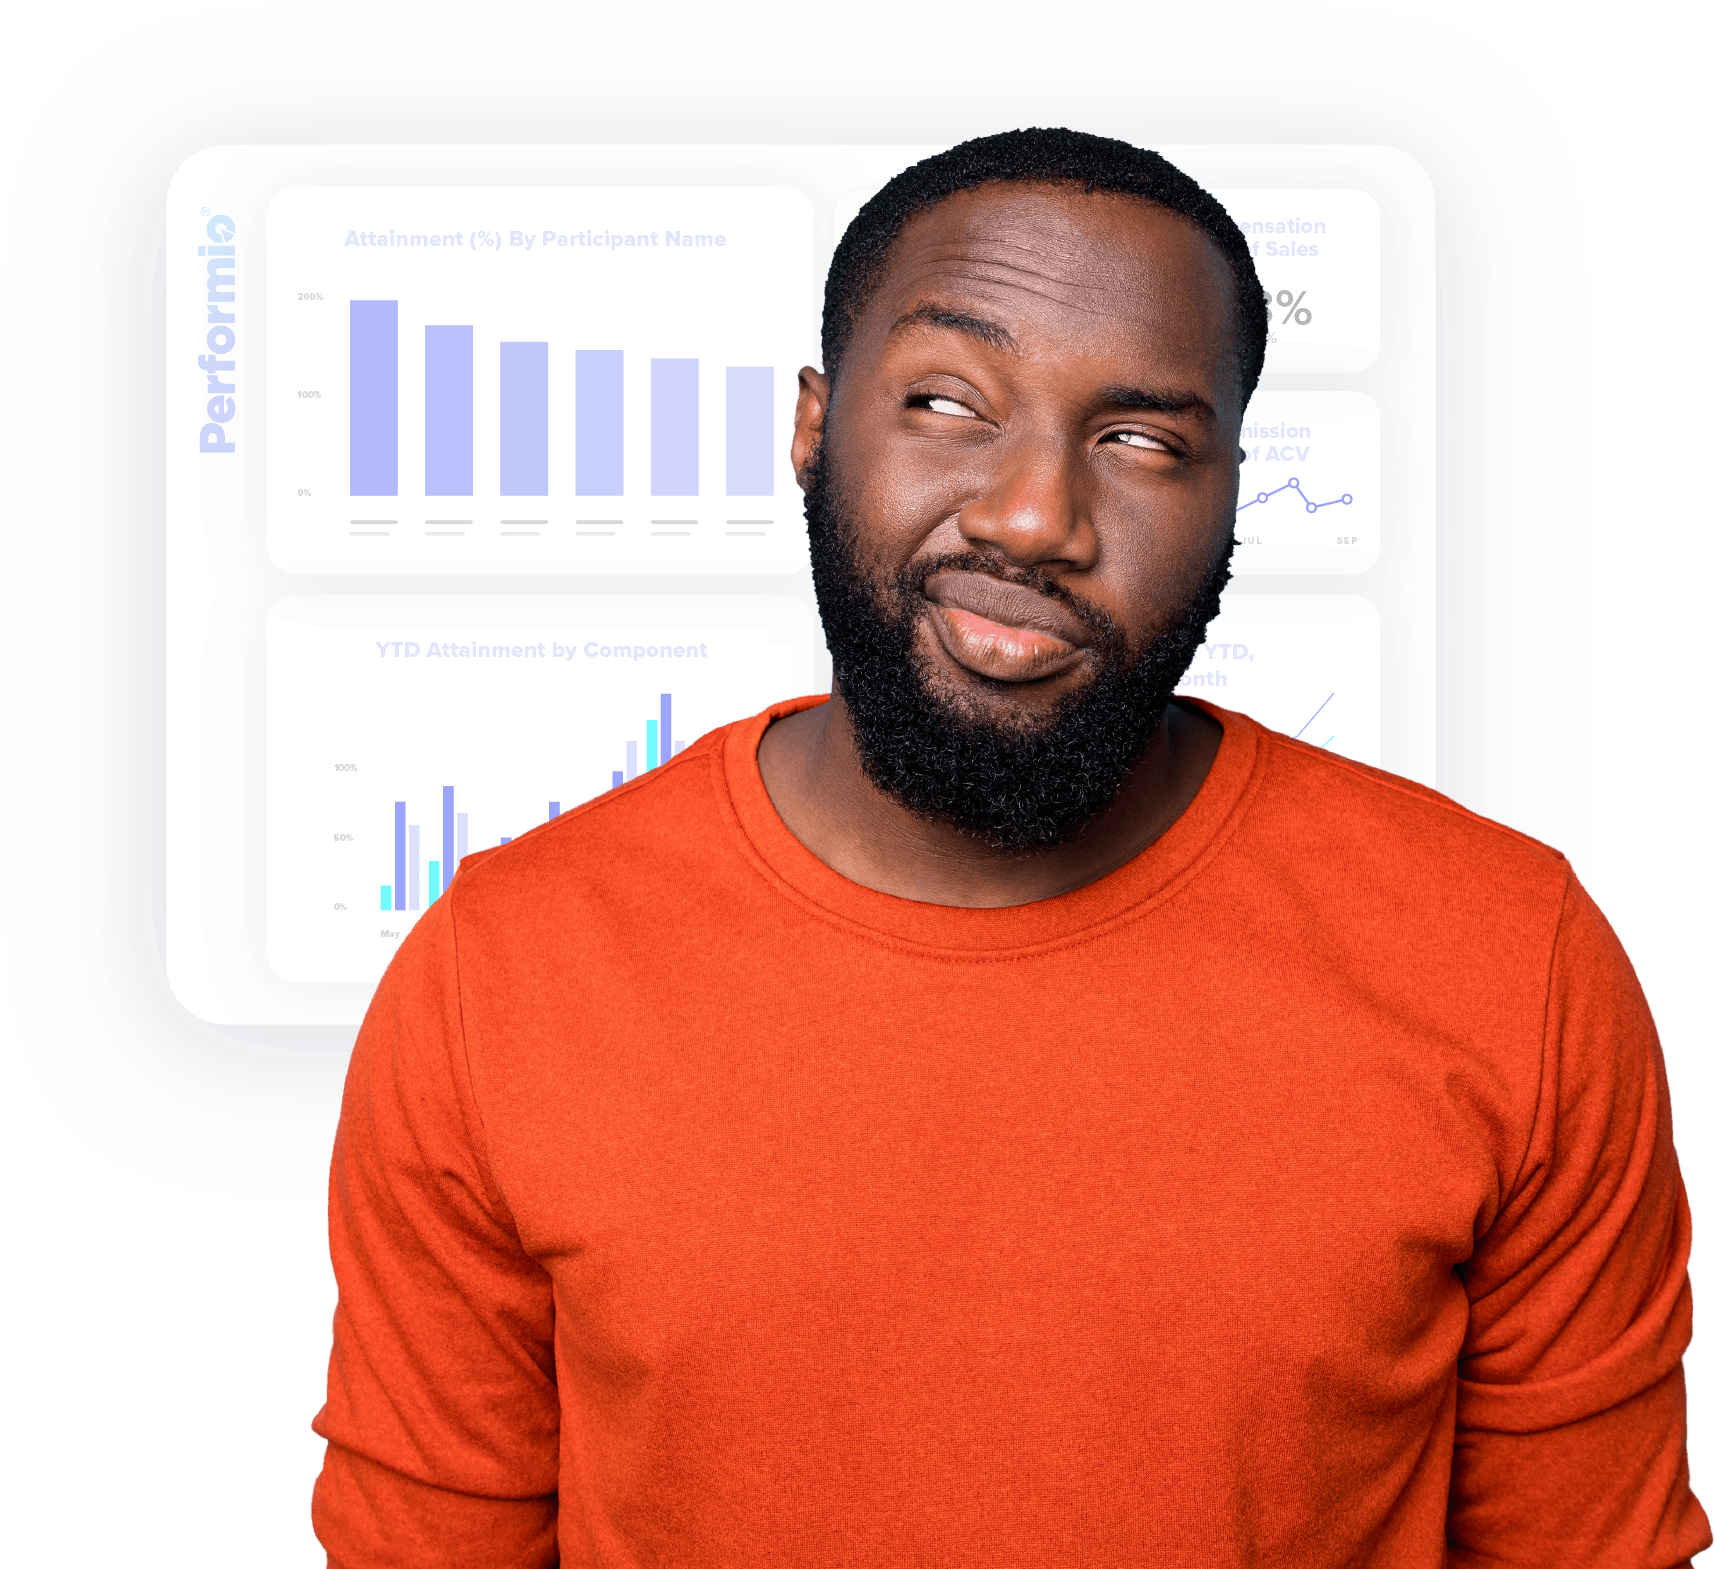 guy-with-orange-shirt-in-front-of-graph